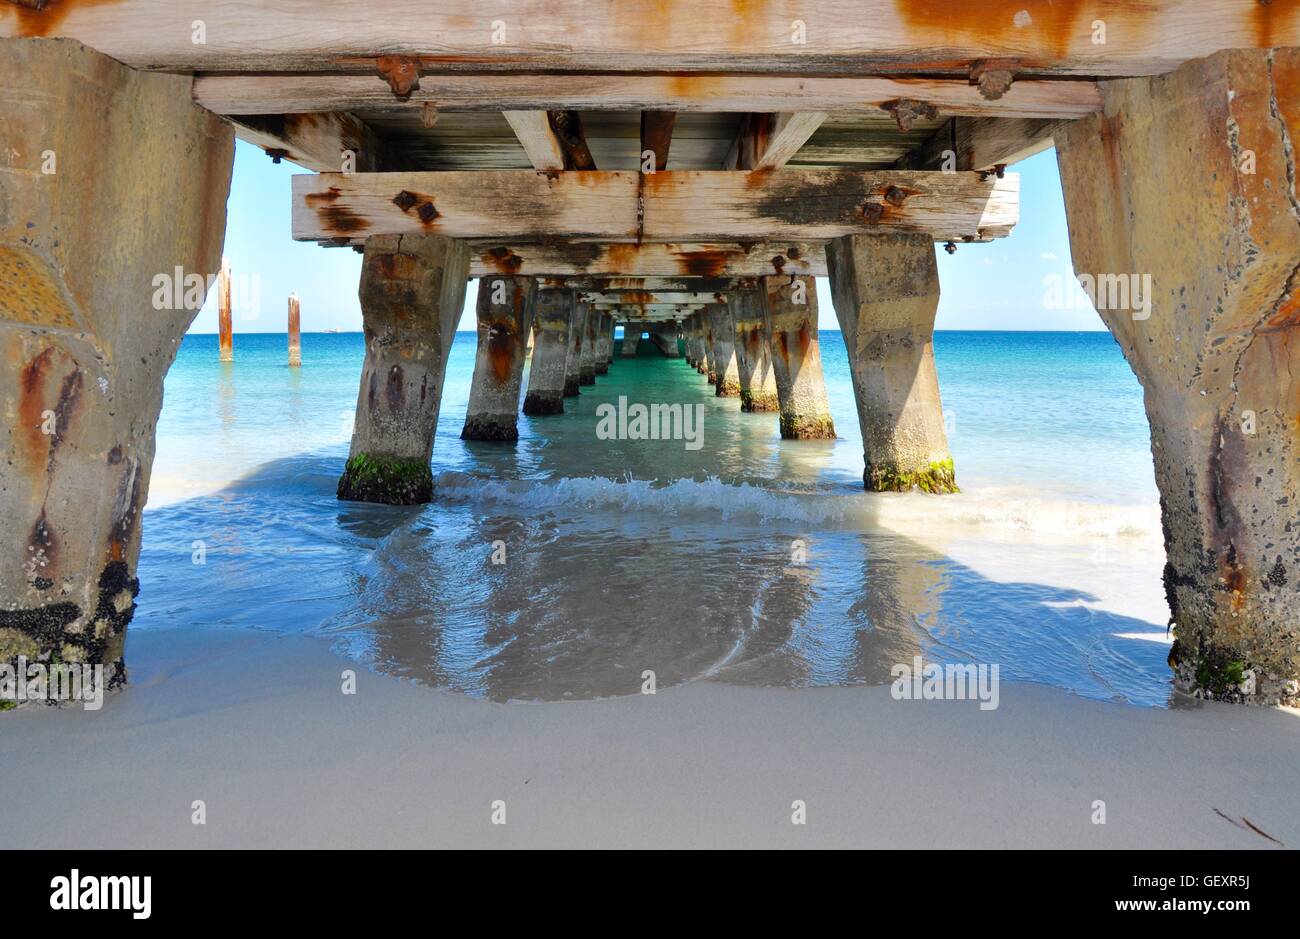 View through the underside of the Coogee Beach jetty structure with the Indian Ocean waters in Coogee, Western Australia. Stock Photo